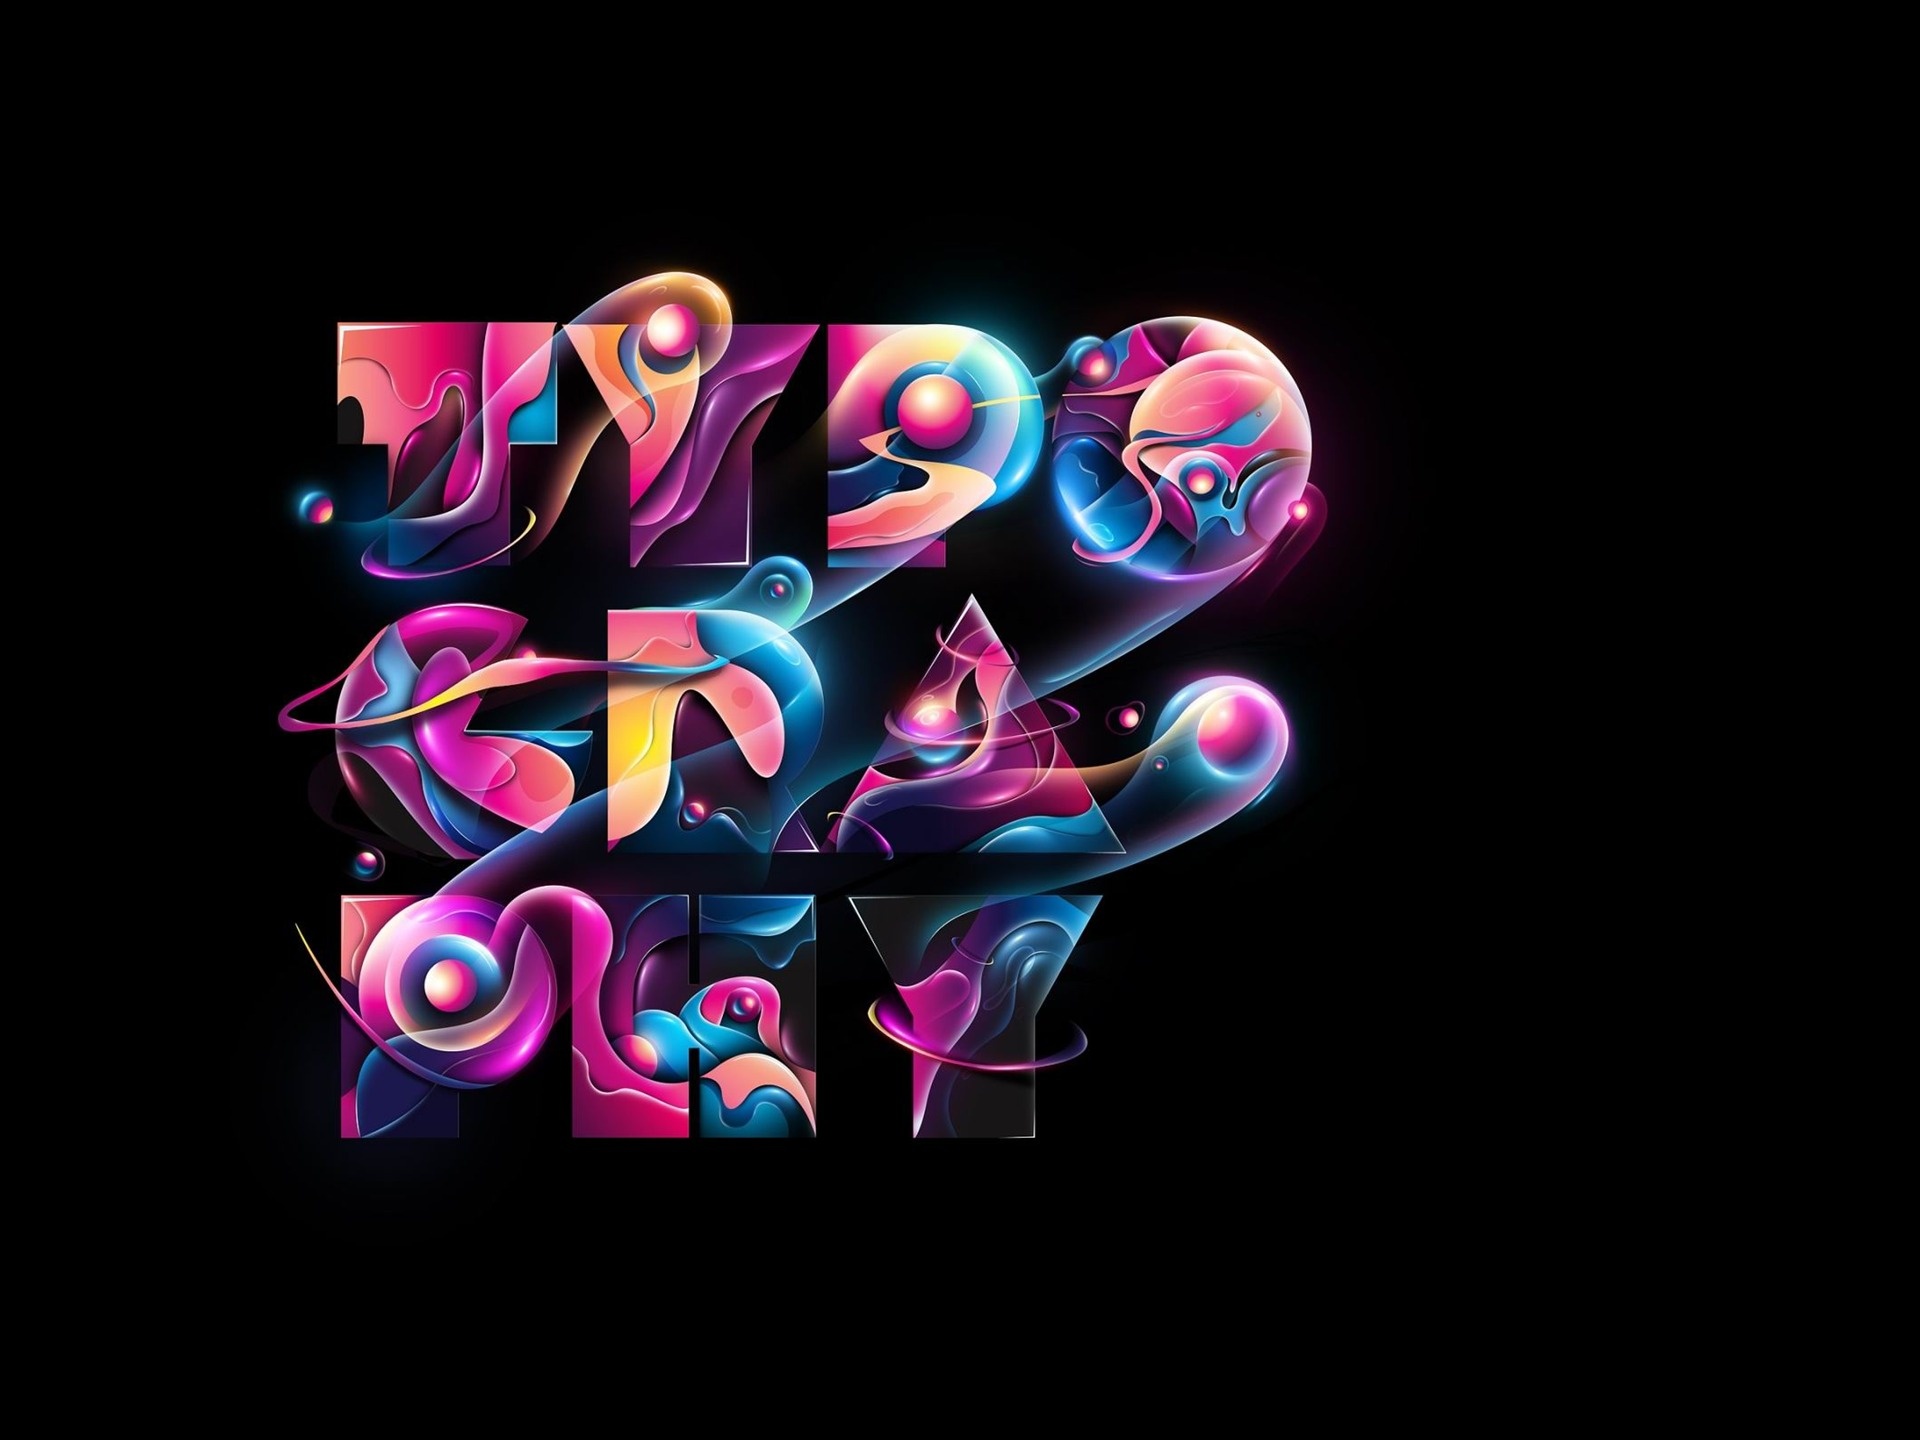 Graphic: Typography, Creative design, Pictorial arts, Cyberspace art, Abstract matter. 1920x1440 HD Wallpaper.